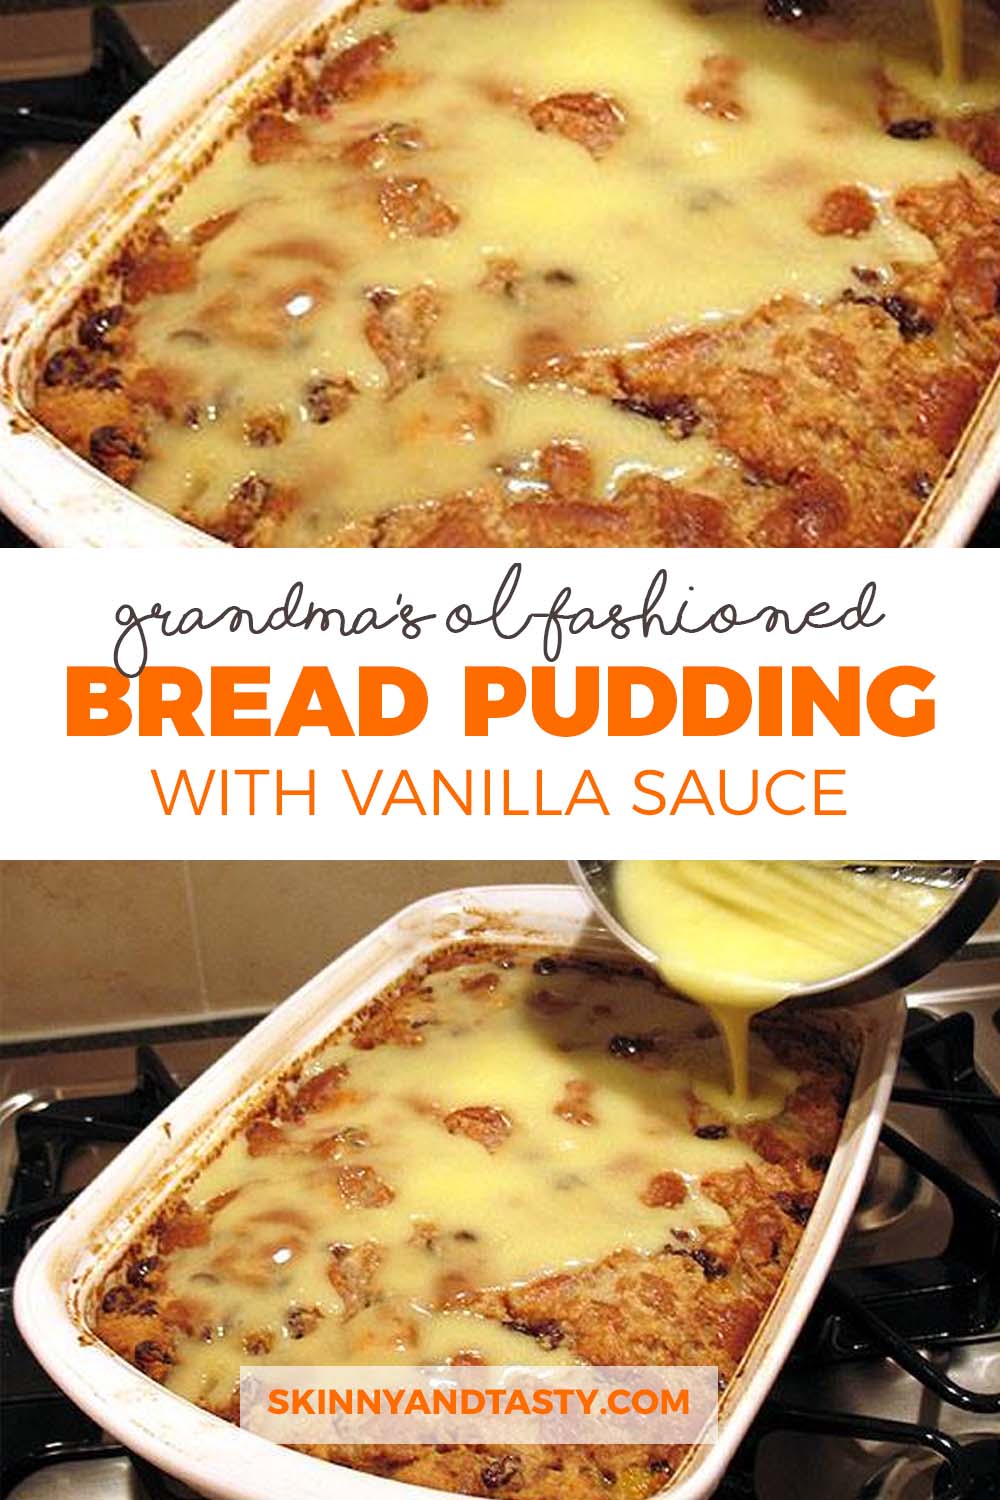 **Indulgent Decadence: Elevating the Classic Bread Pudding Recipe from Preppy Kitchen**